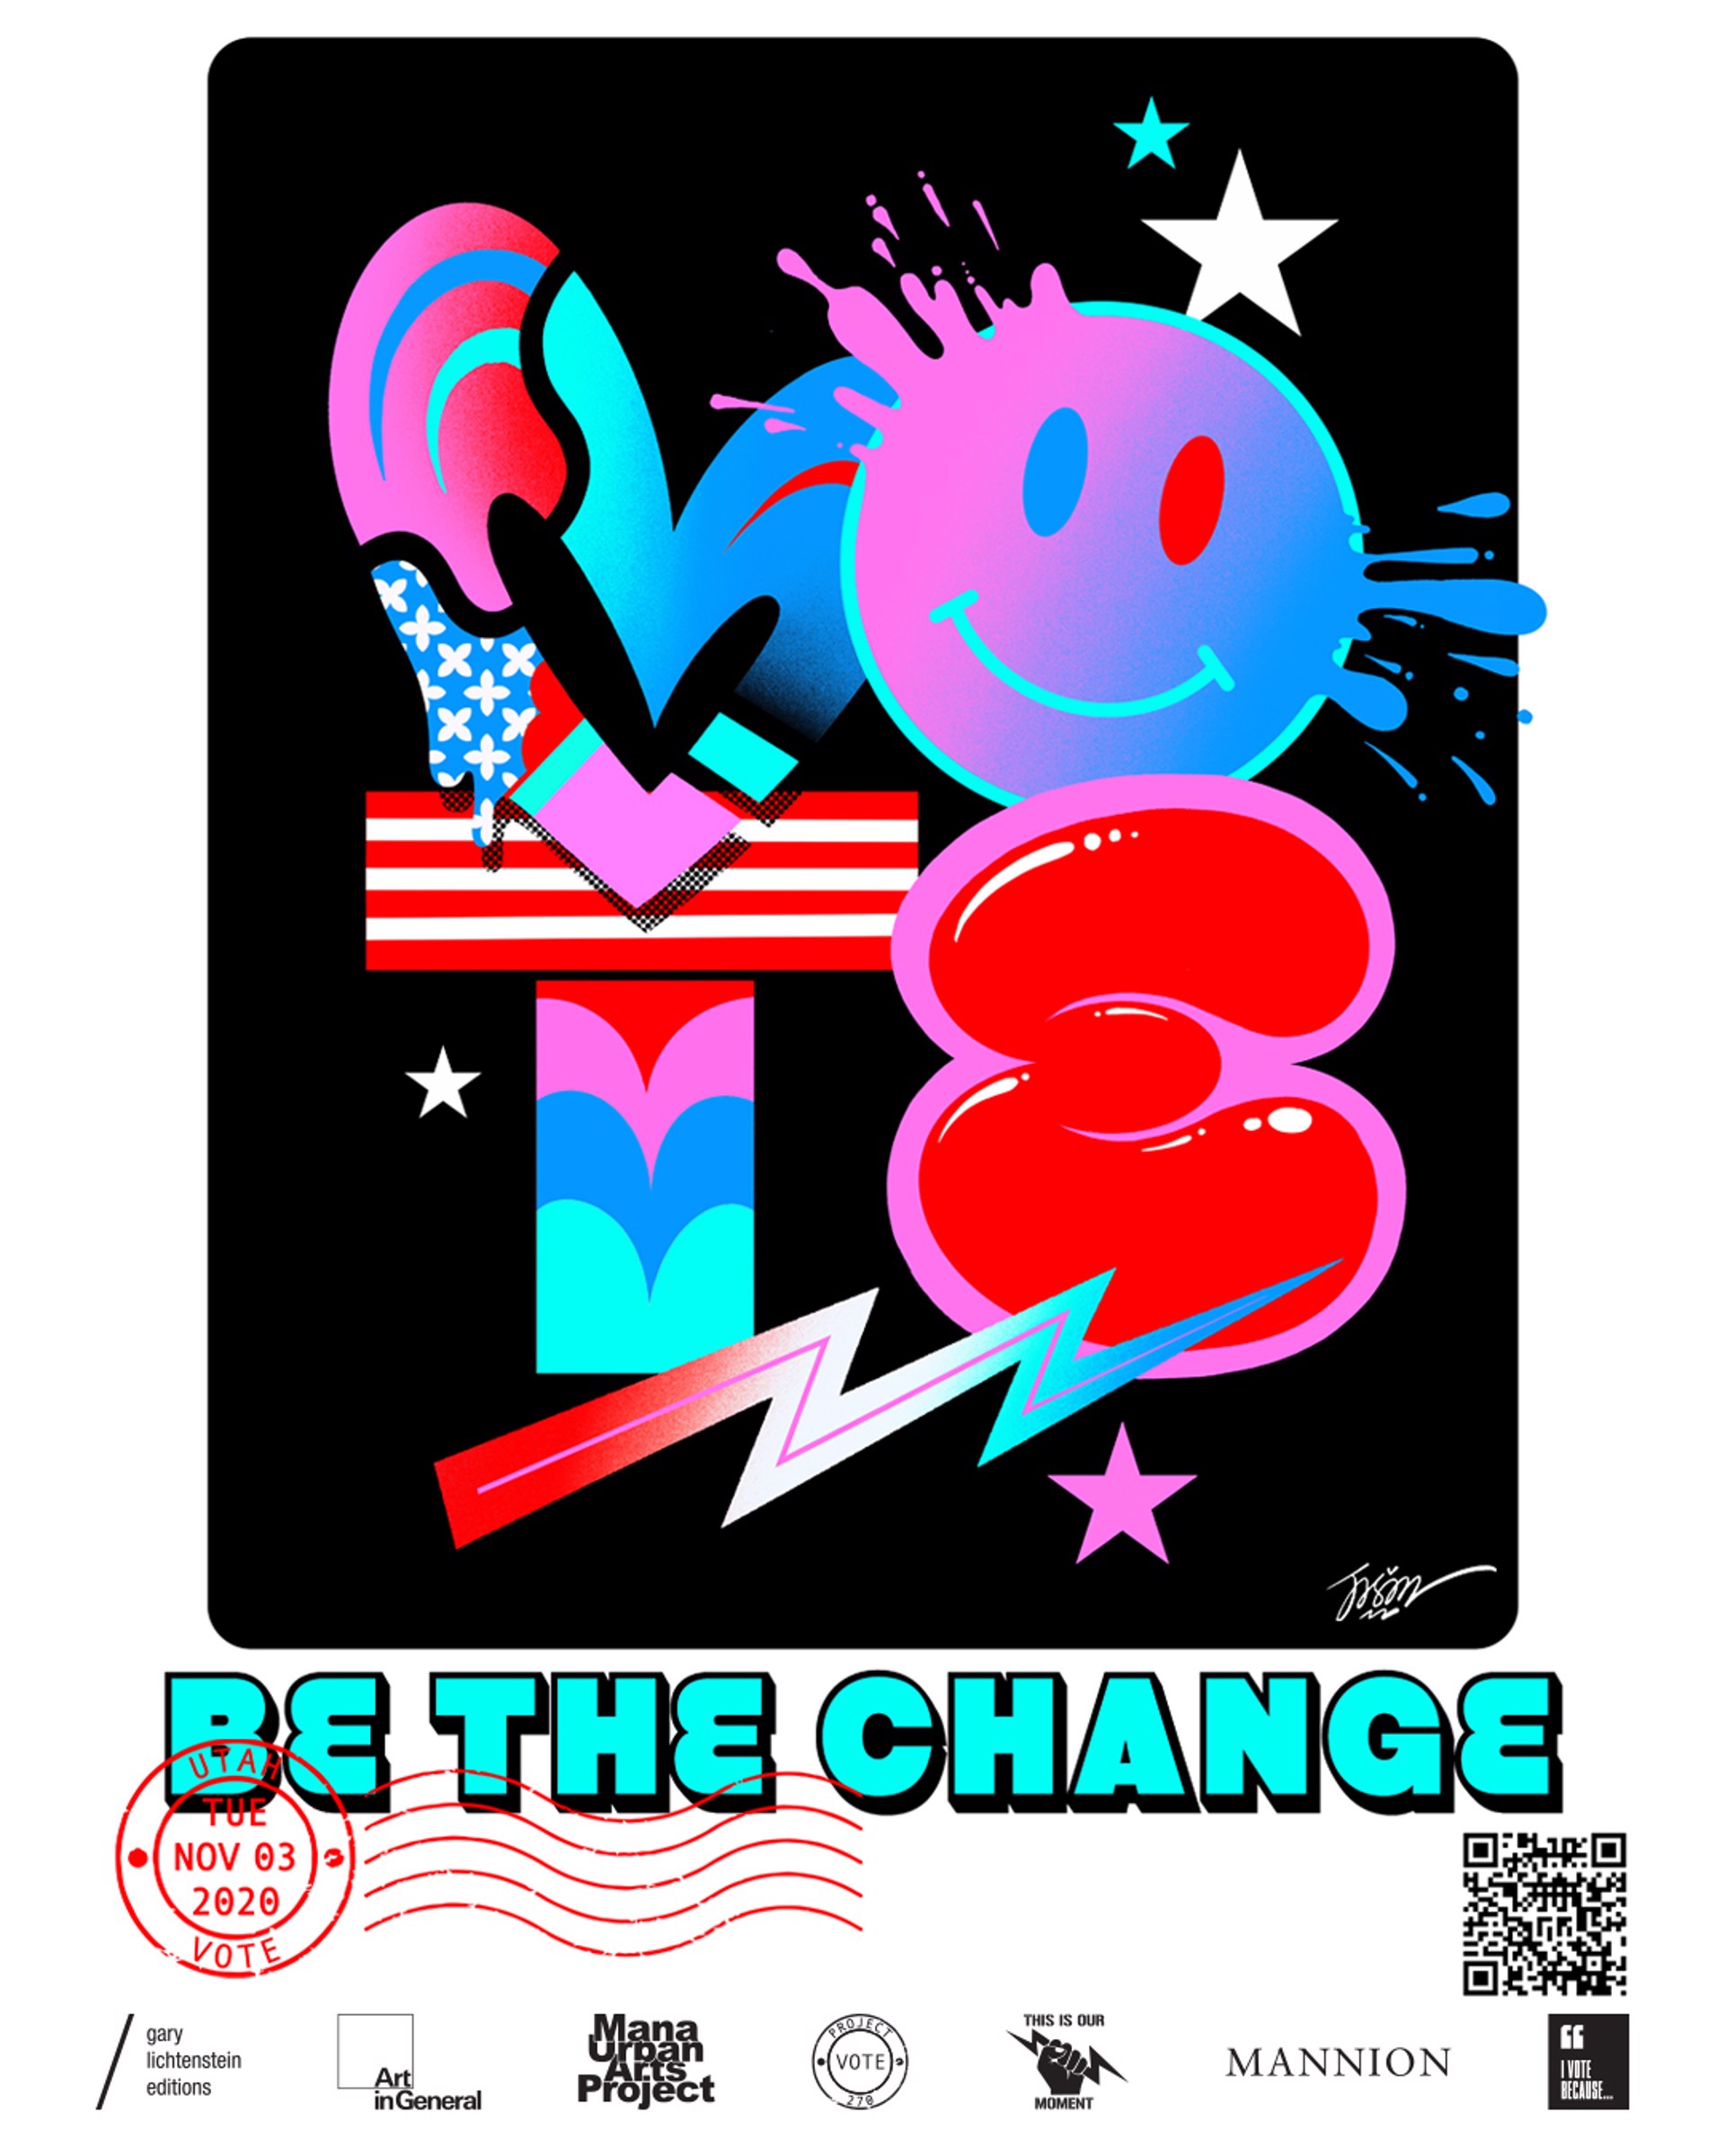 Be The Change by Jason Naylor